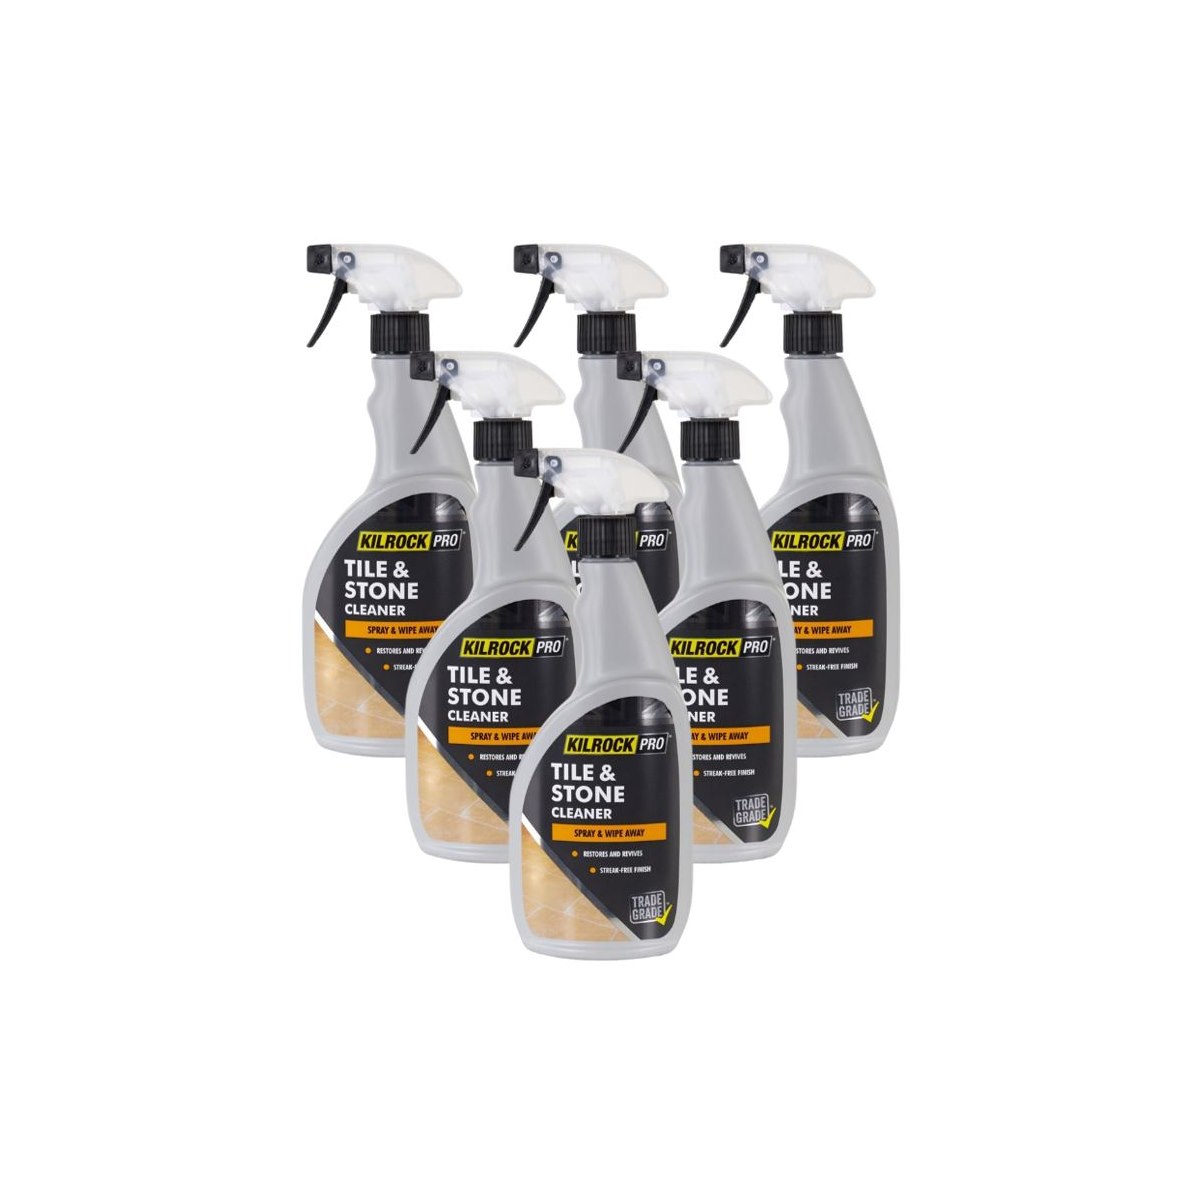 Case of 6 x Kilrock Pro Tile and Stone Cleaner 750ml